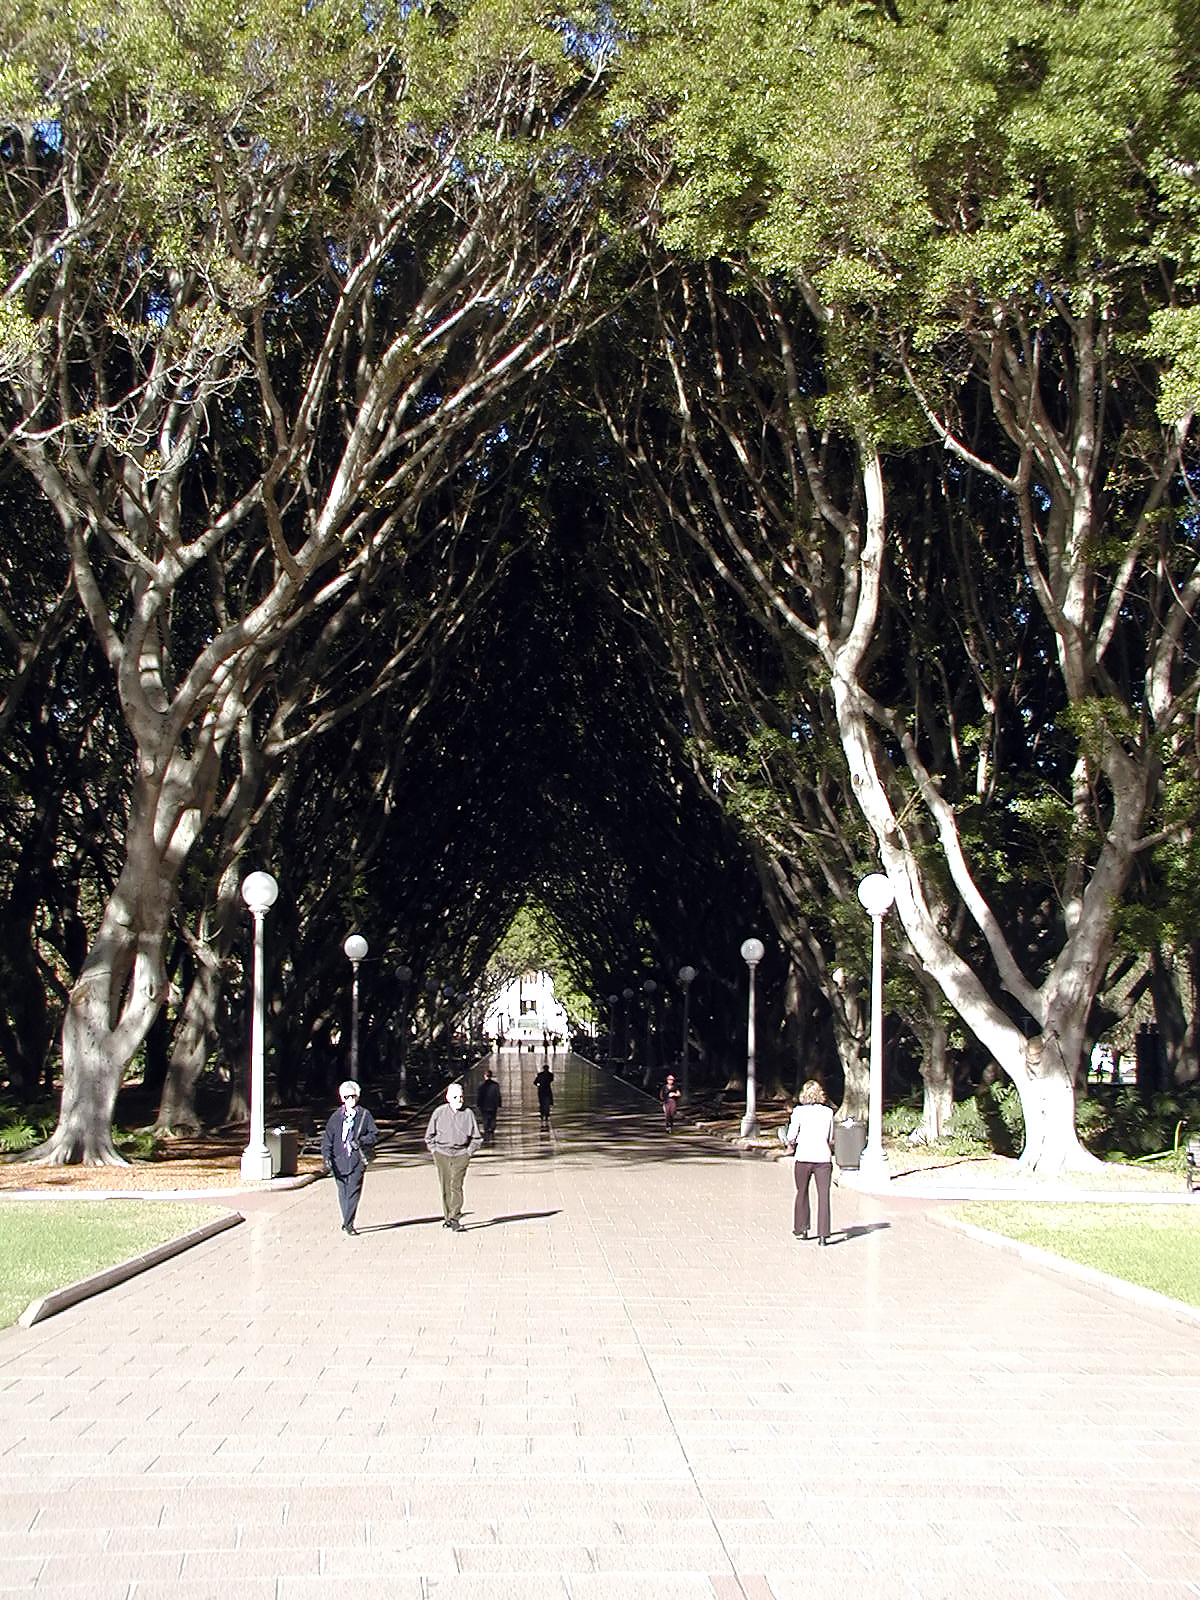 20-Jun-2001 09:59 - Sydney - Avenue of trees leading to the Anzac Memorial